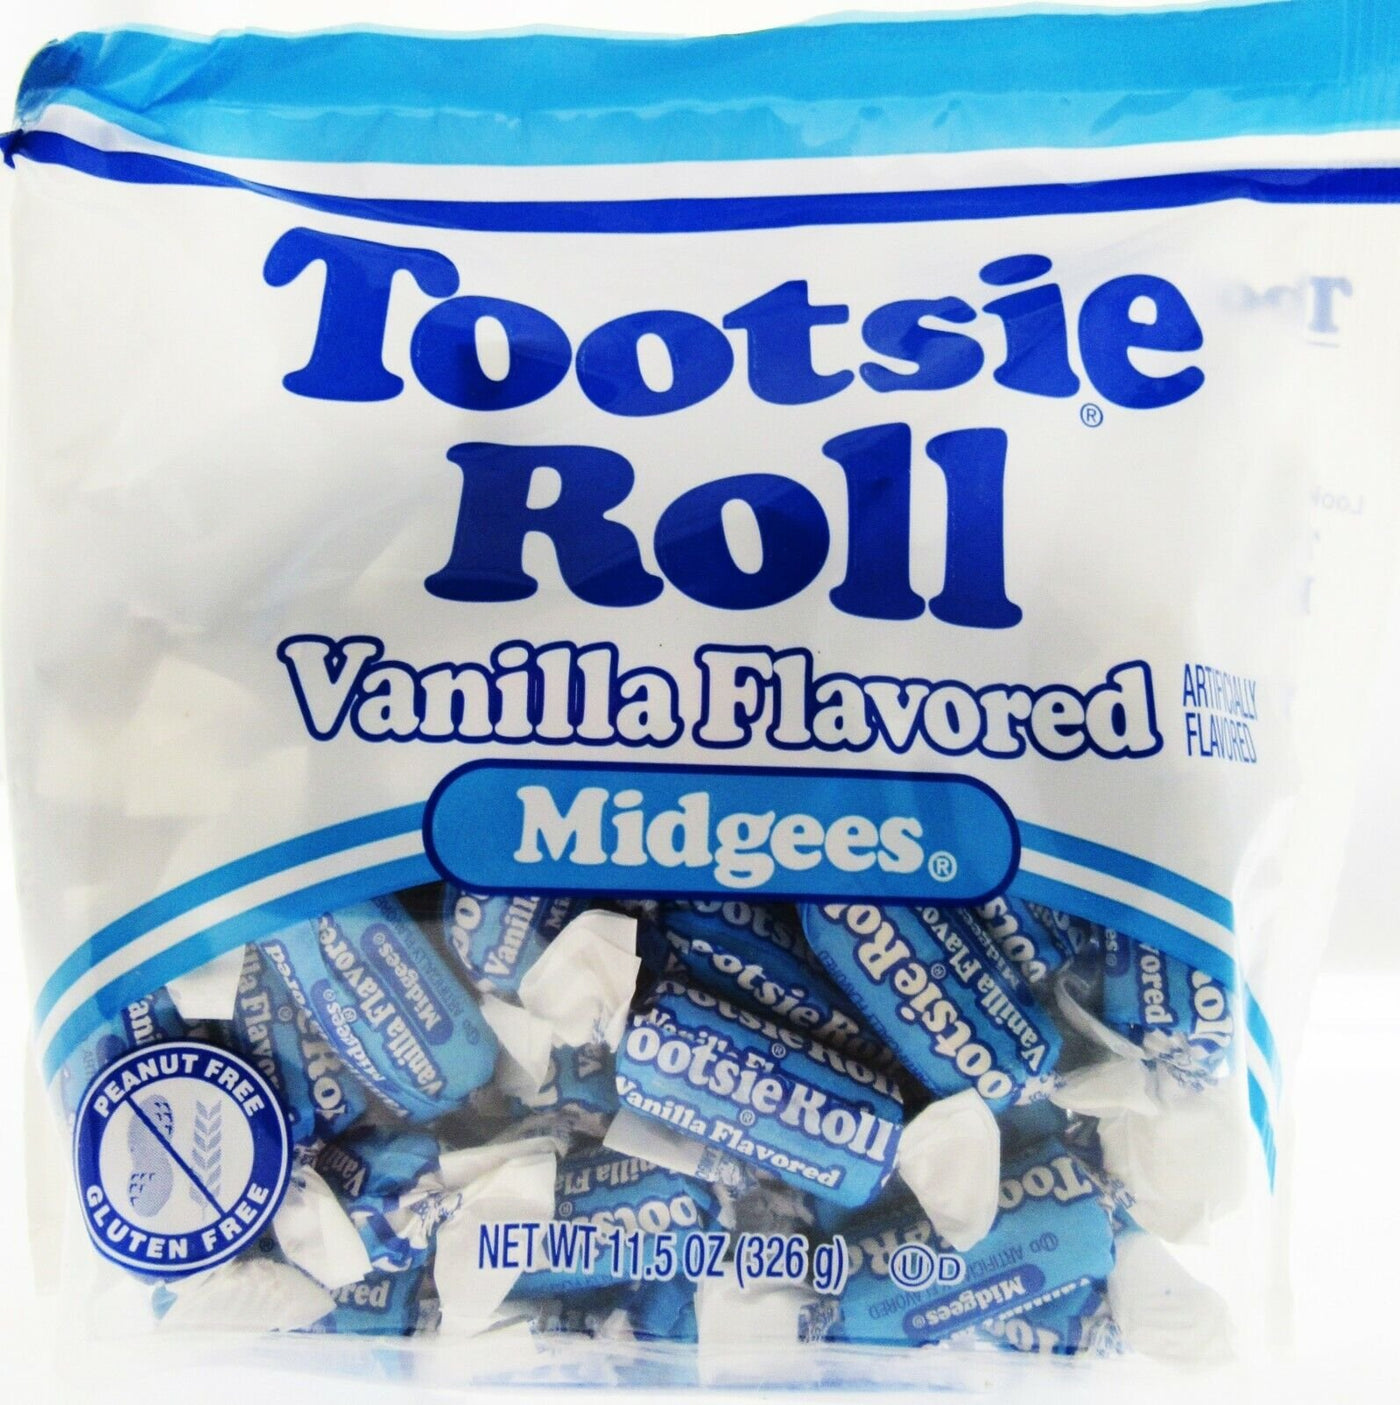 Tootsie Roll Vanilla Flavored Midgees Chewy Rolls Candy Candies ~ 11.5oz bag